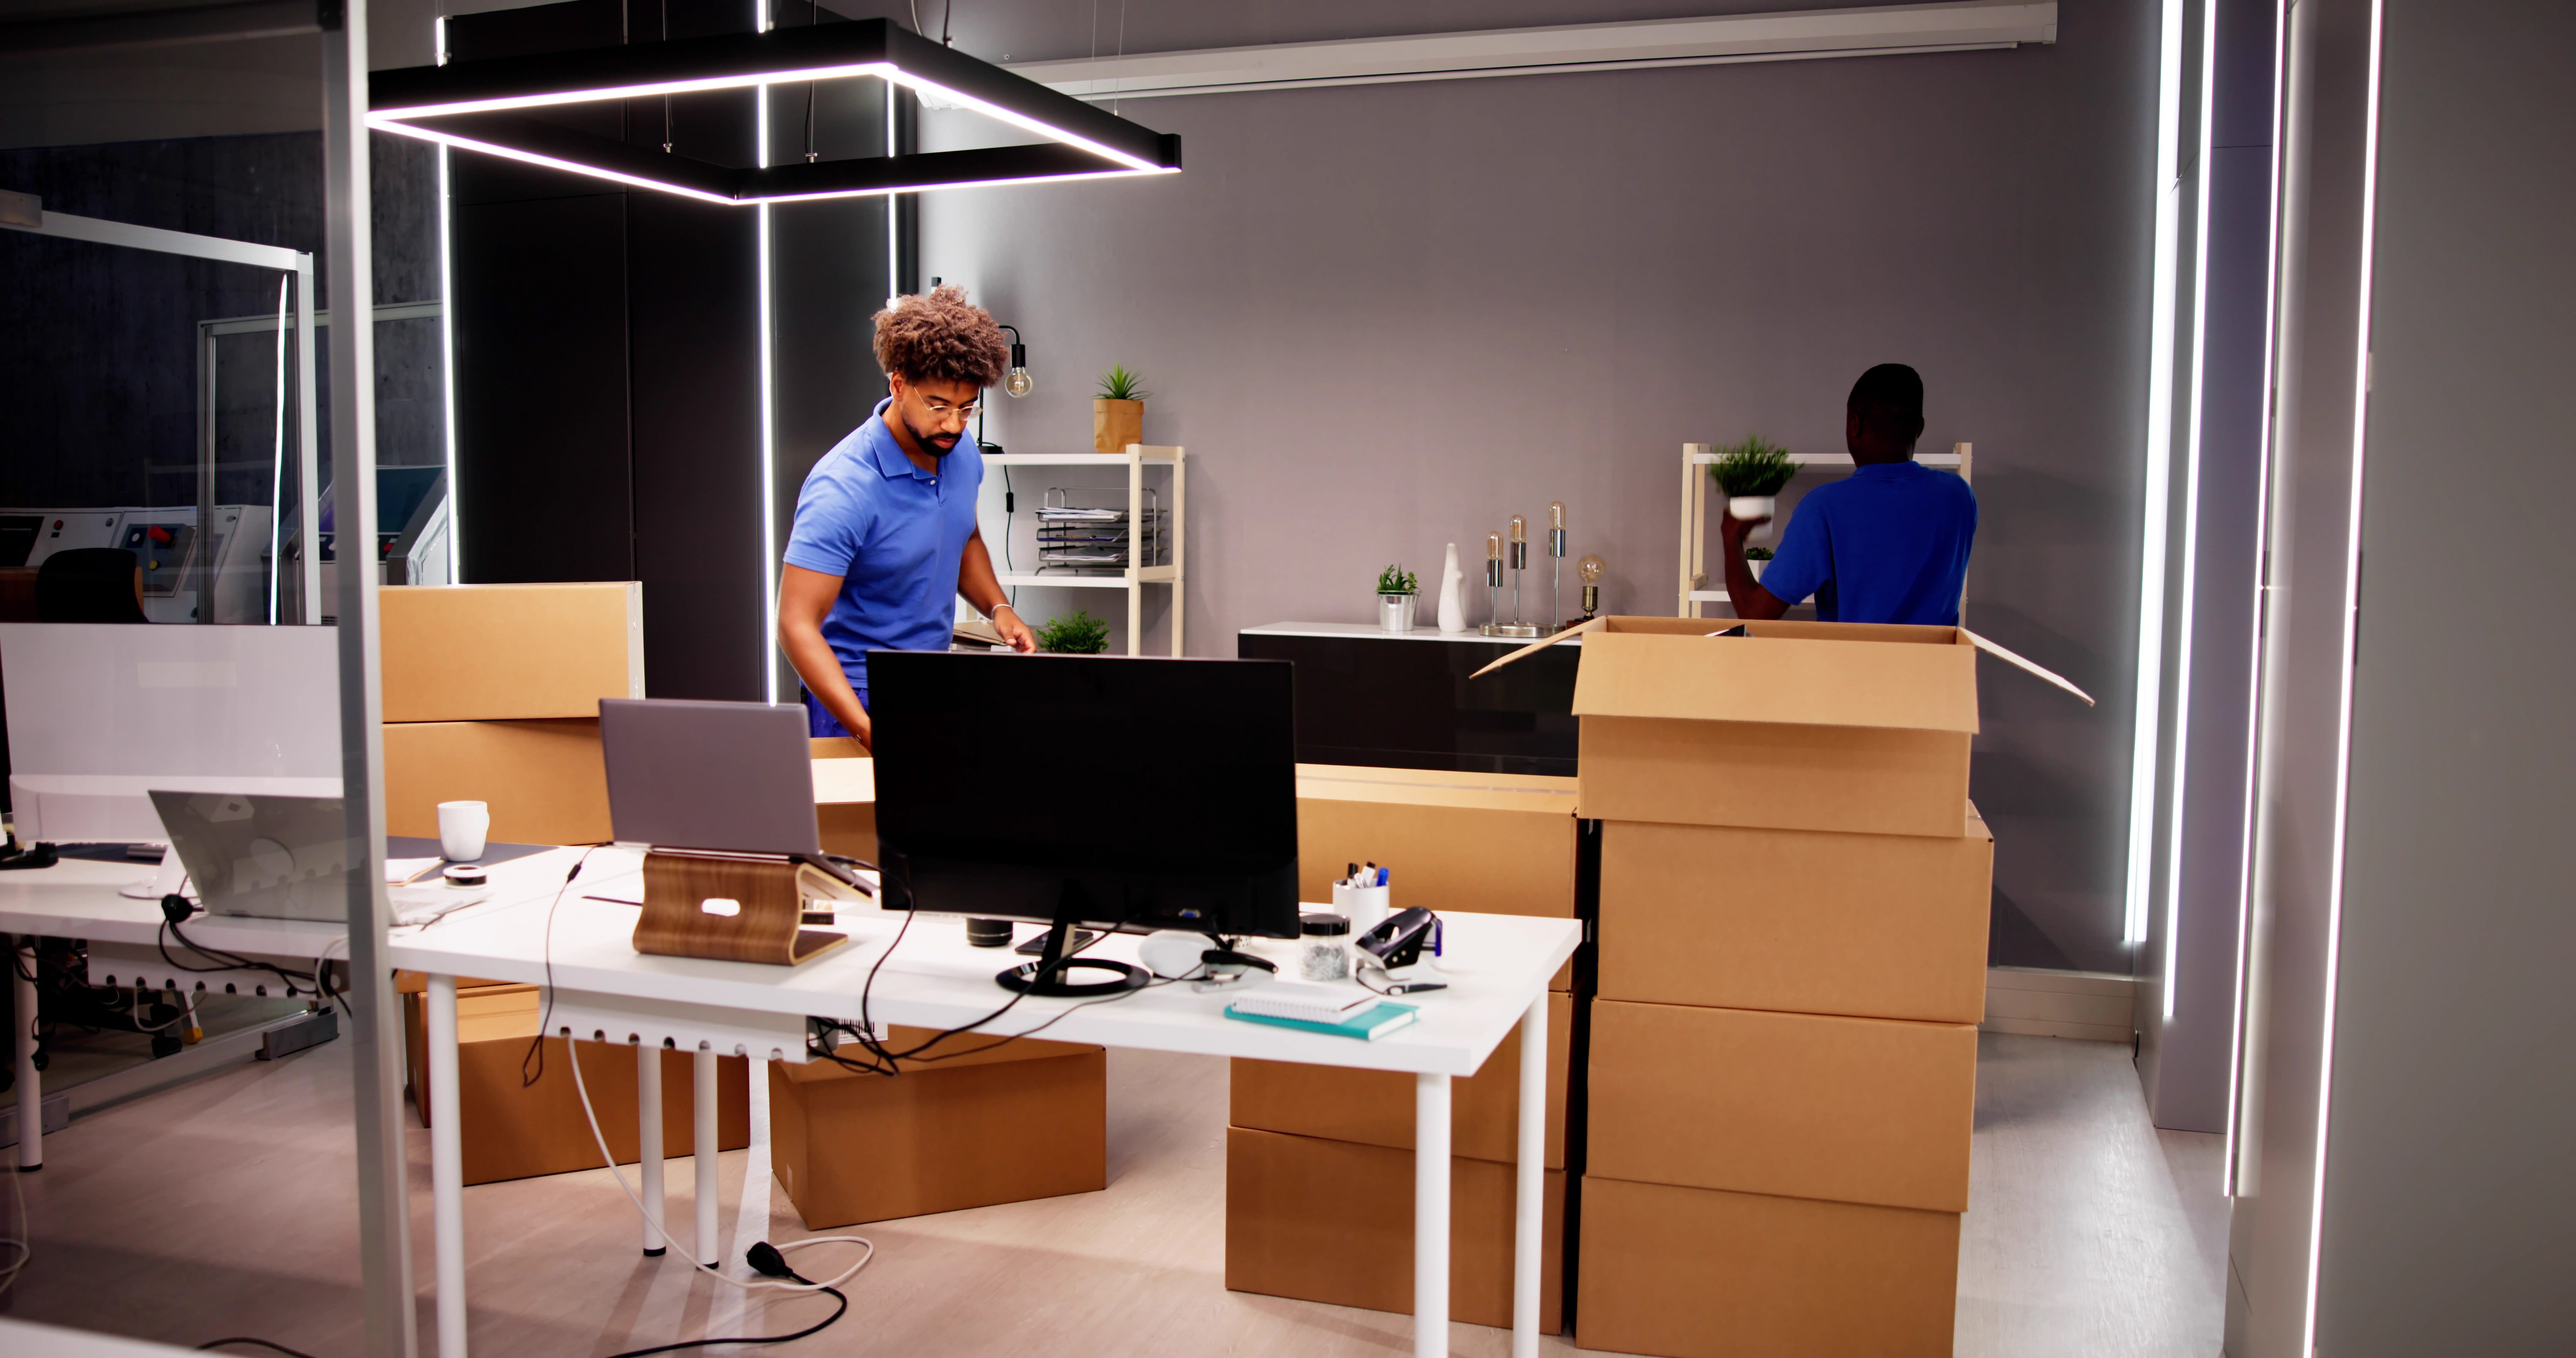 5 Areas We Inspect When Receiving Office Furniture